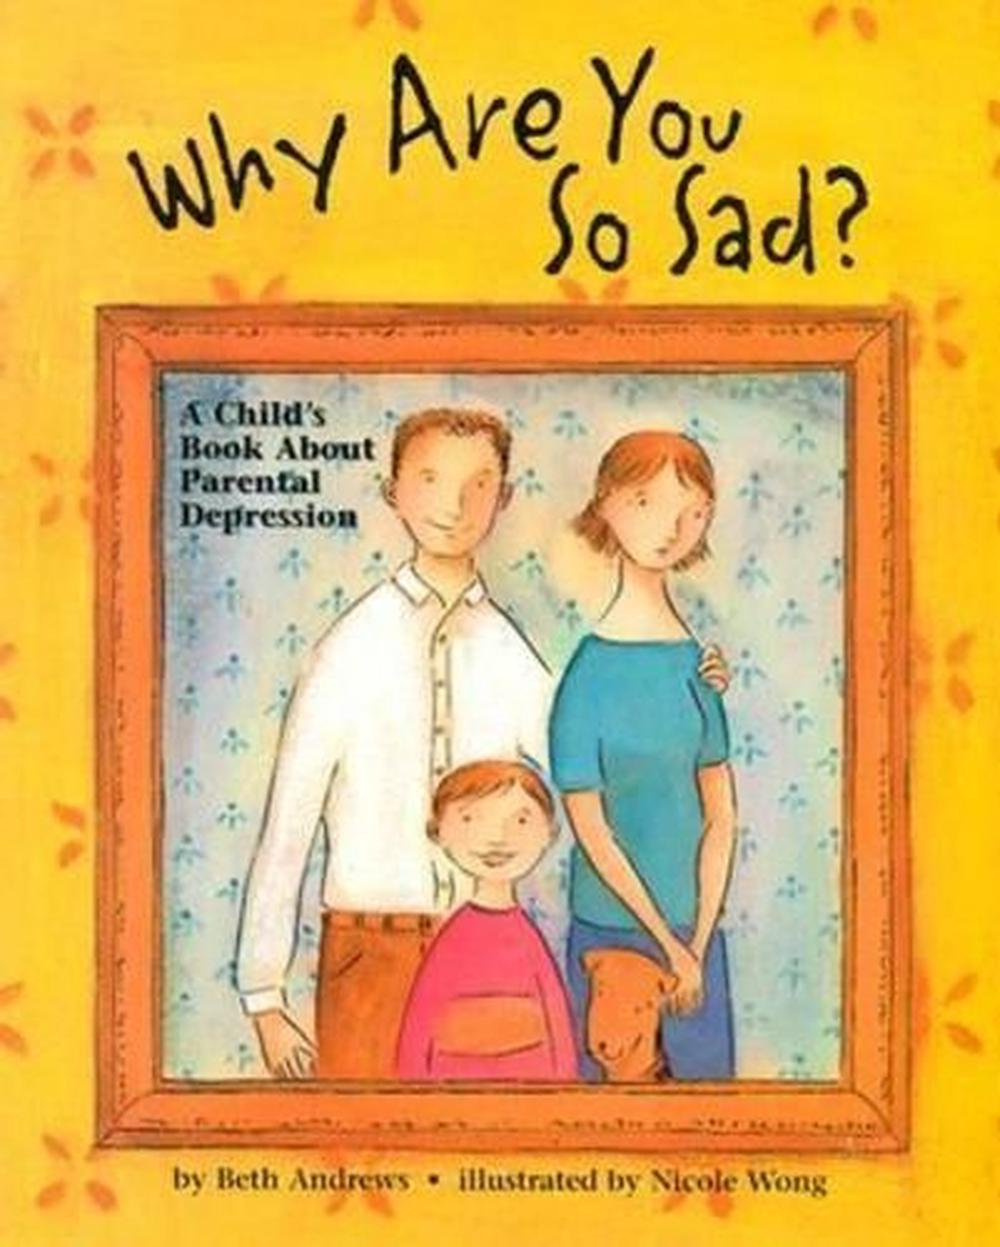 Why Are You So Sad A Child's Book about Parental Depression by Beth